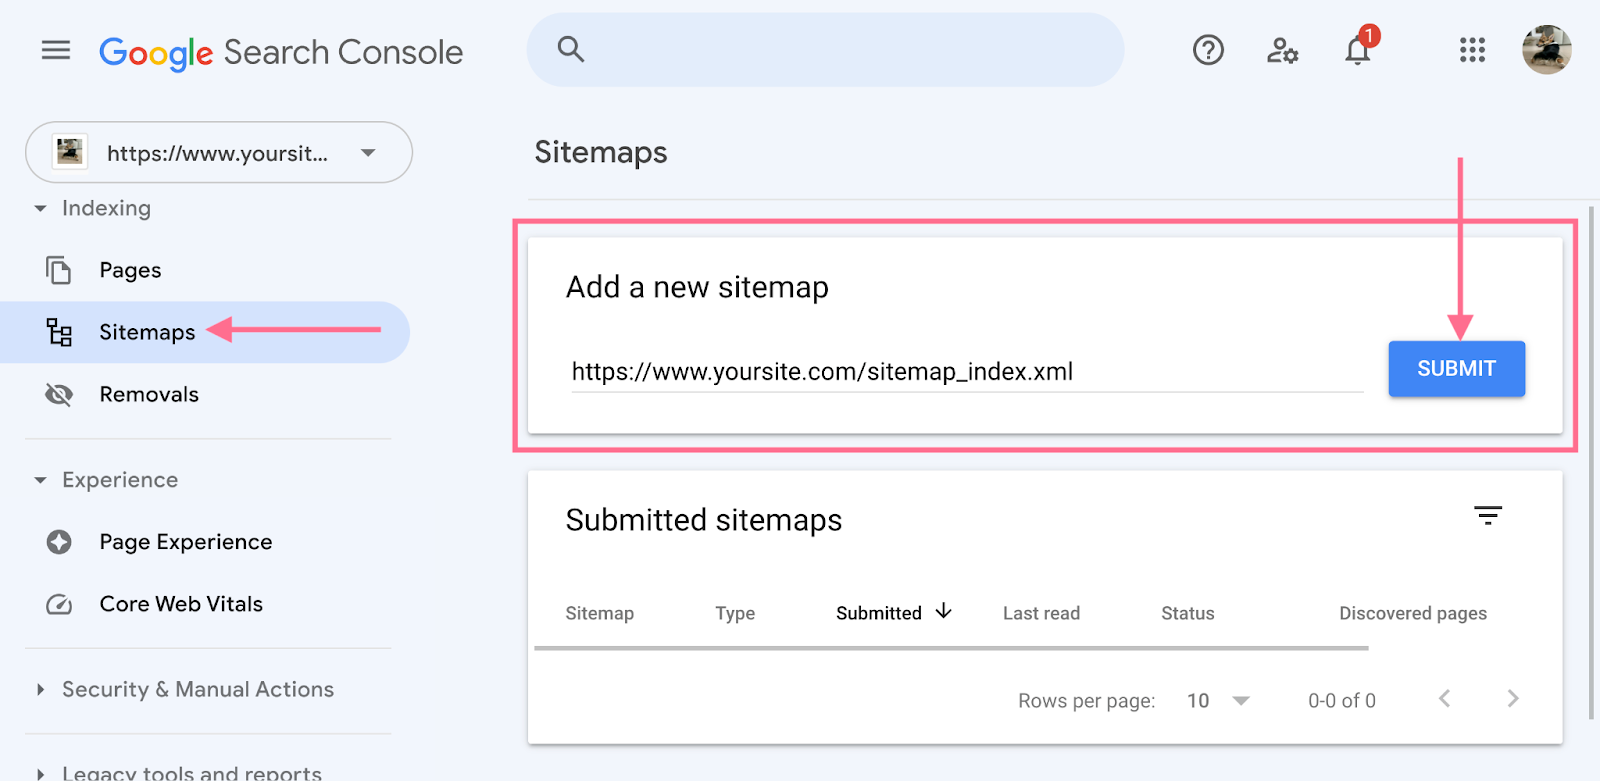 Submitting a sitemap to Google